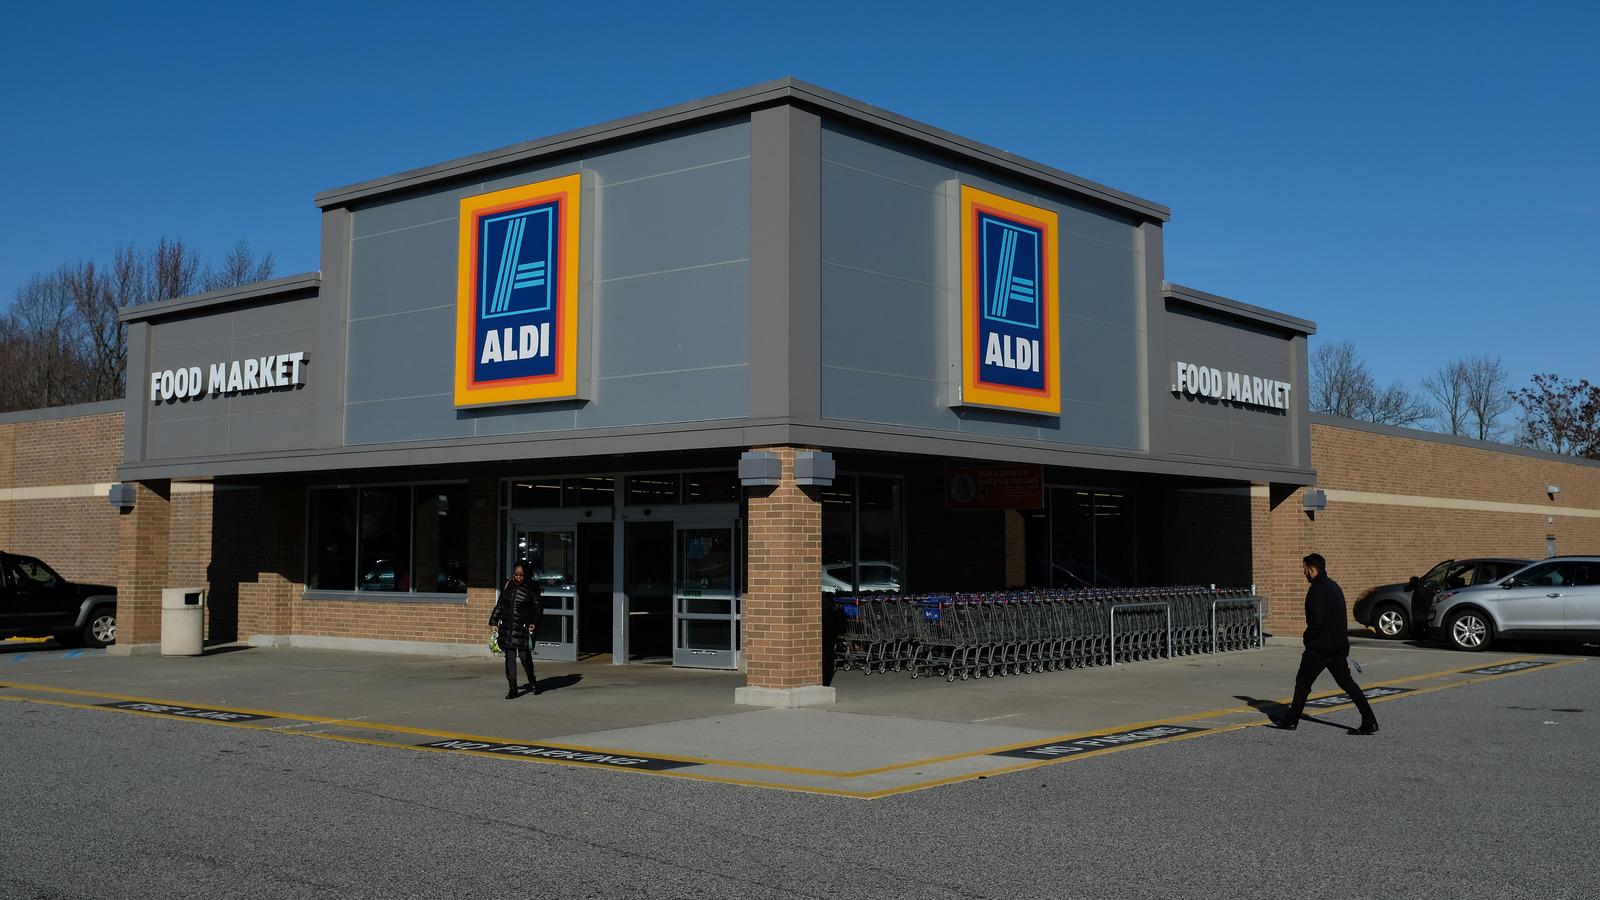 Is Aldi Open On Christmas Day 2020?